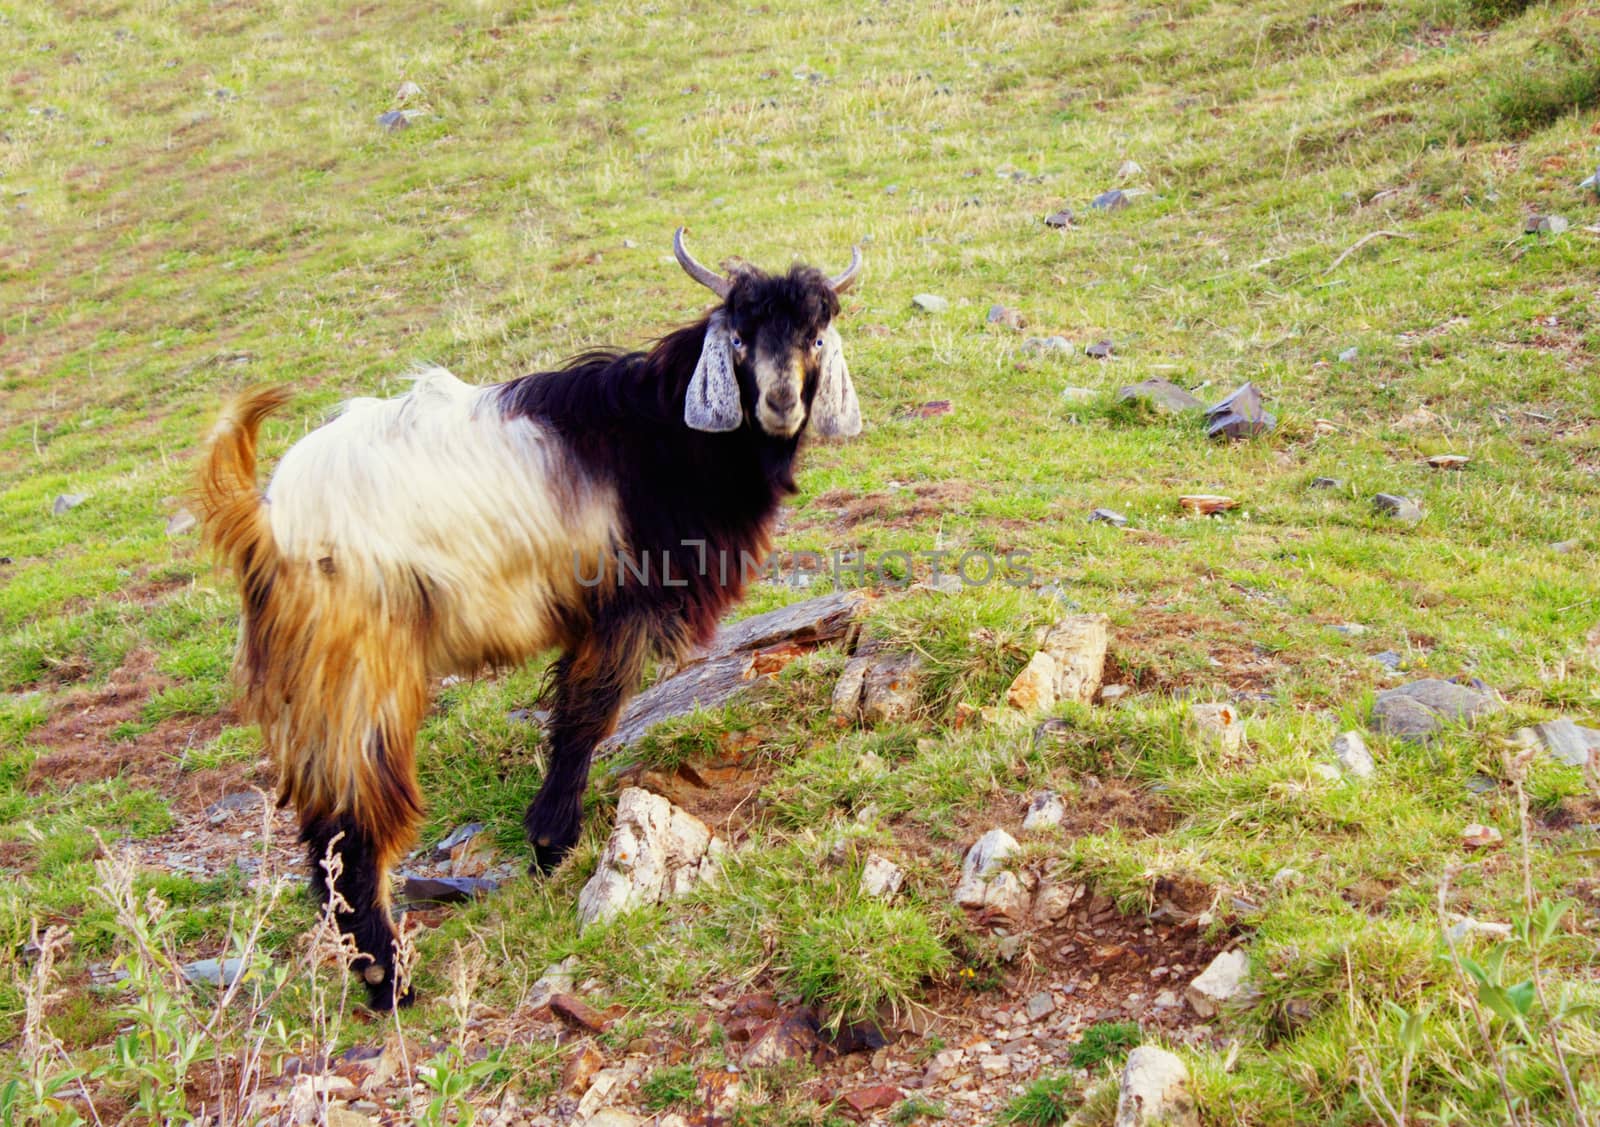 Himalayan goat grazing on the hill slopes, looking right into the camera lens
